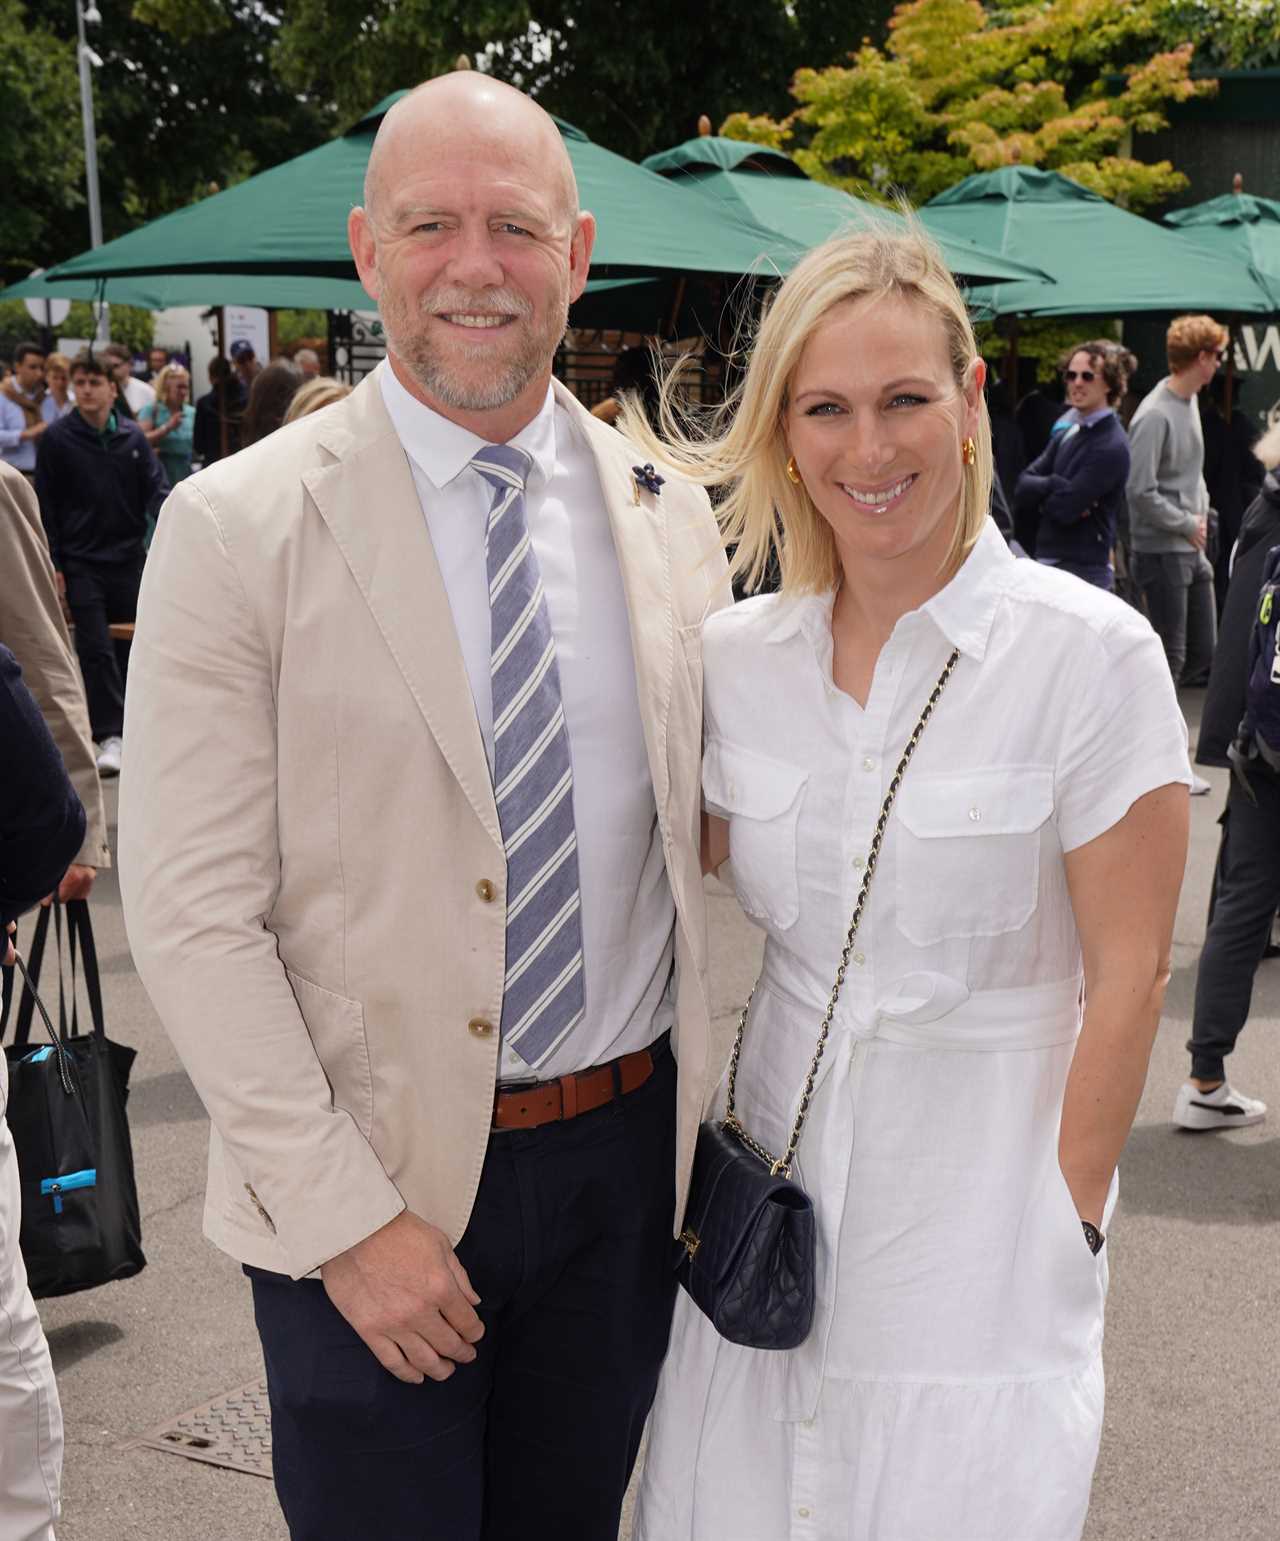 Who is Mike Tindall and what does he do for a living?